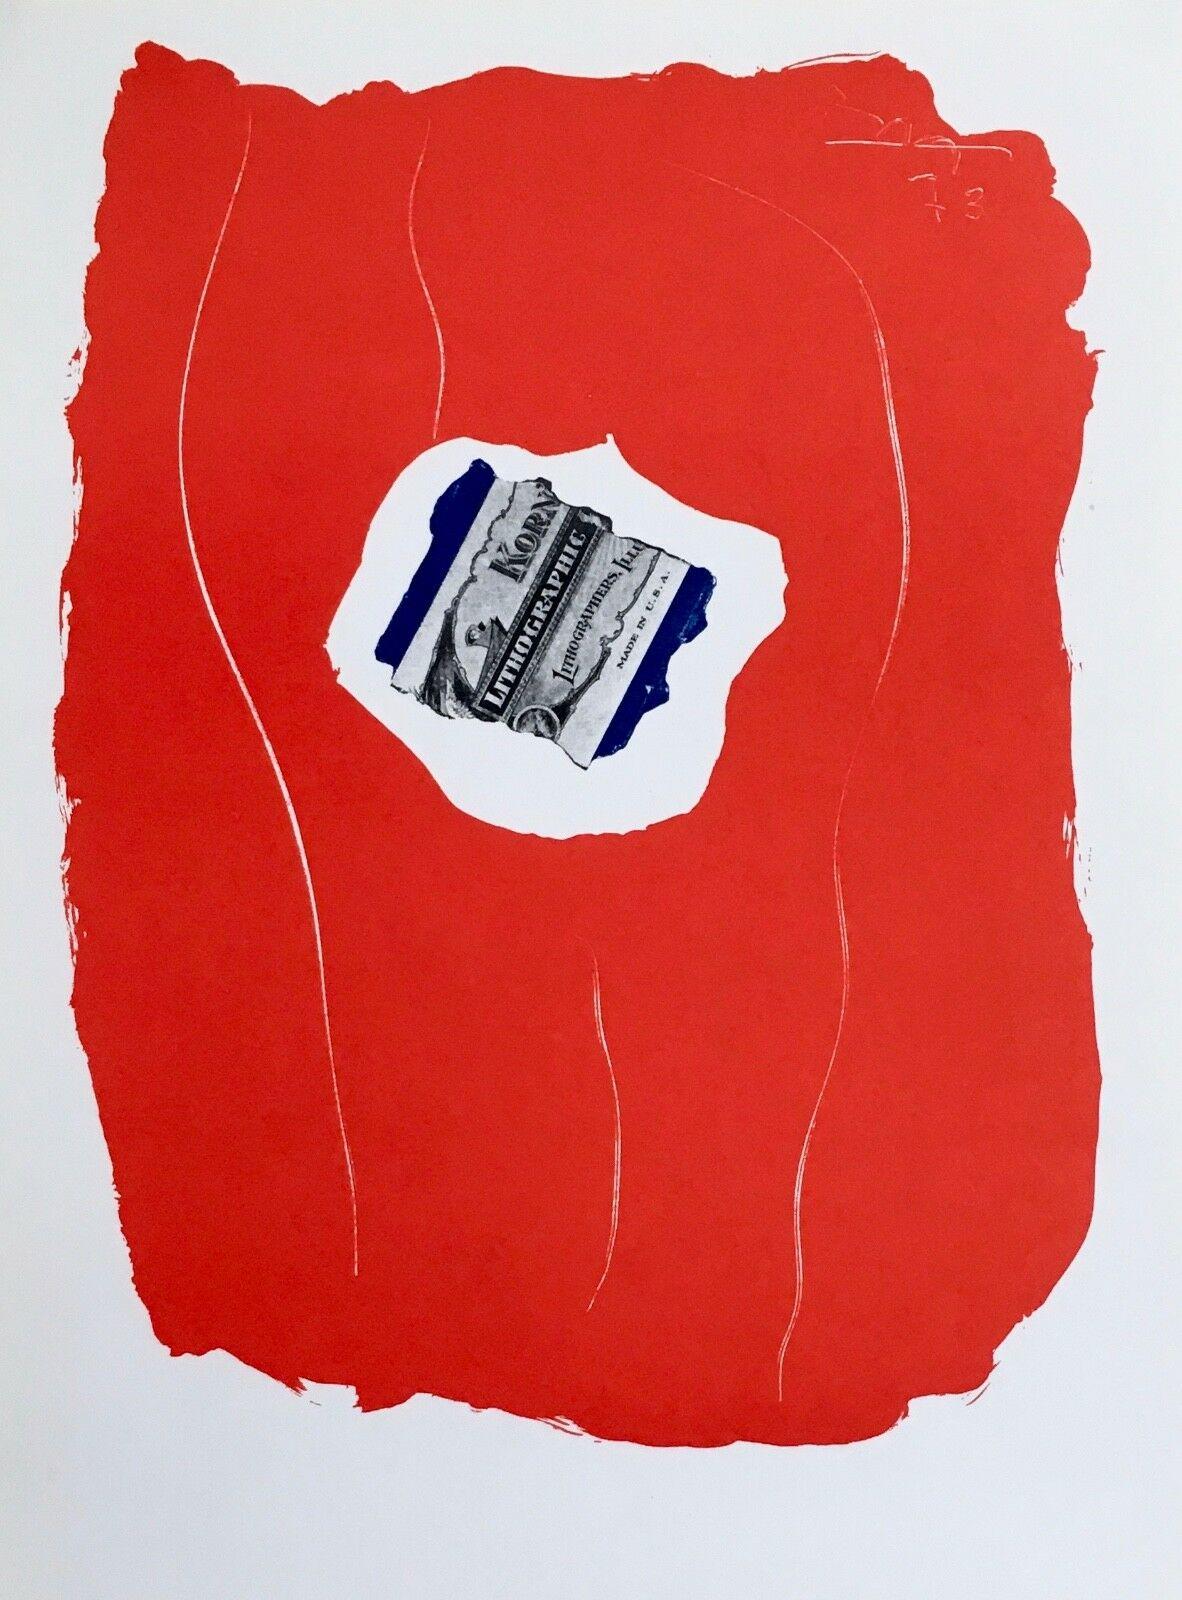 ROBERT MOTHERWELL (1915-1991) A leading exponent of American abstract expressionism, Robert Motherwell has served as a vital spokesman for the avant-garde of the mid-twentieth century. He introduced the term "Abstract Expressionism" into the United